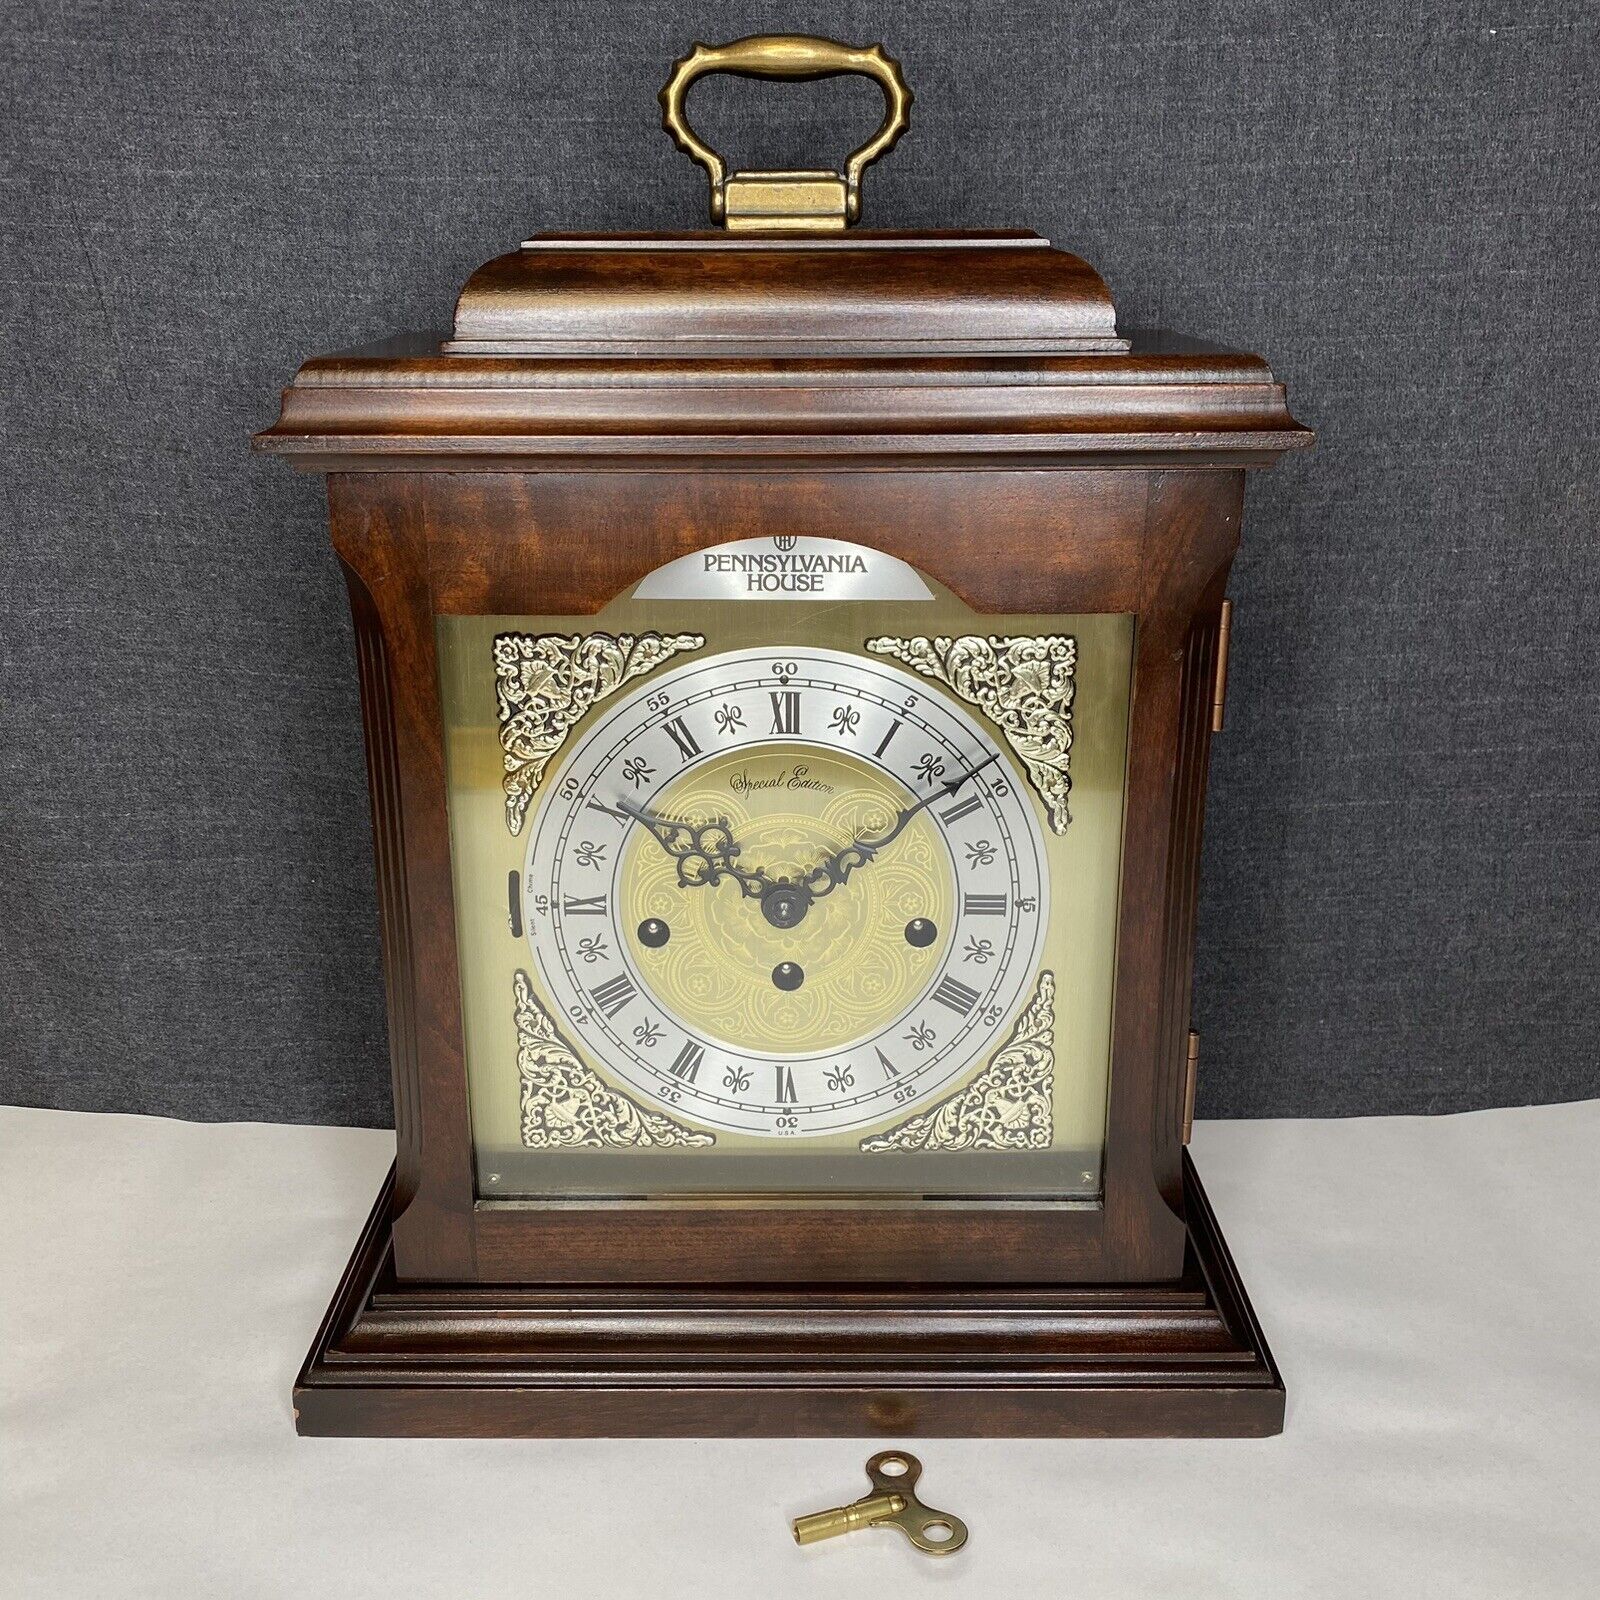 Pennsylvania House Hermle 340-020A Germany Westminster Chime Mantle Clock w/Key